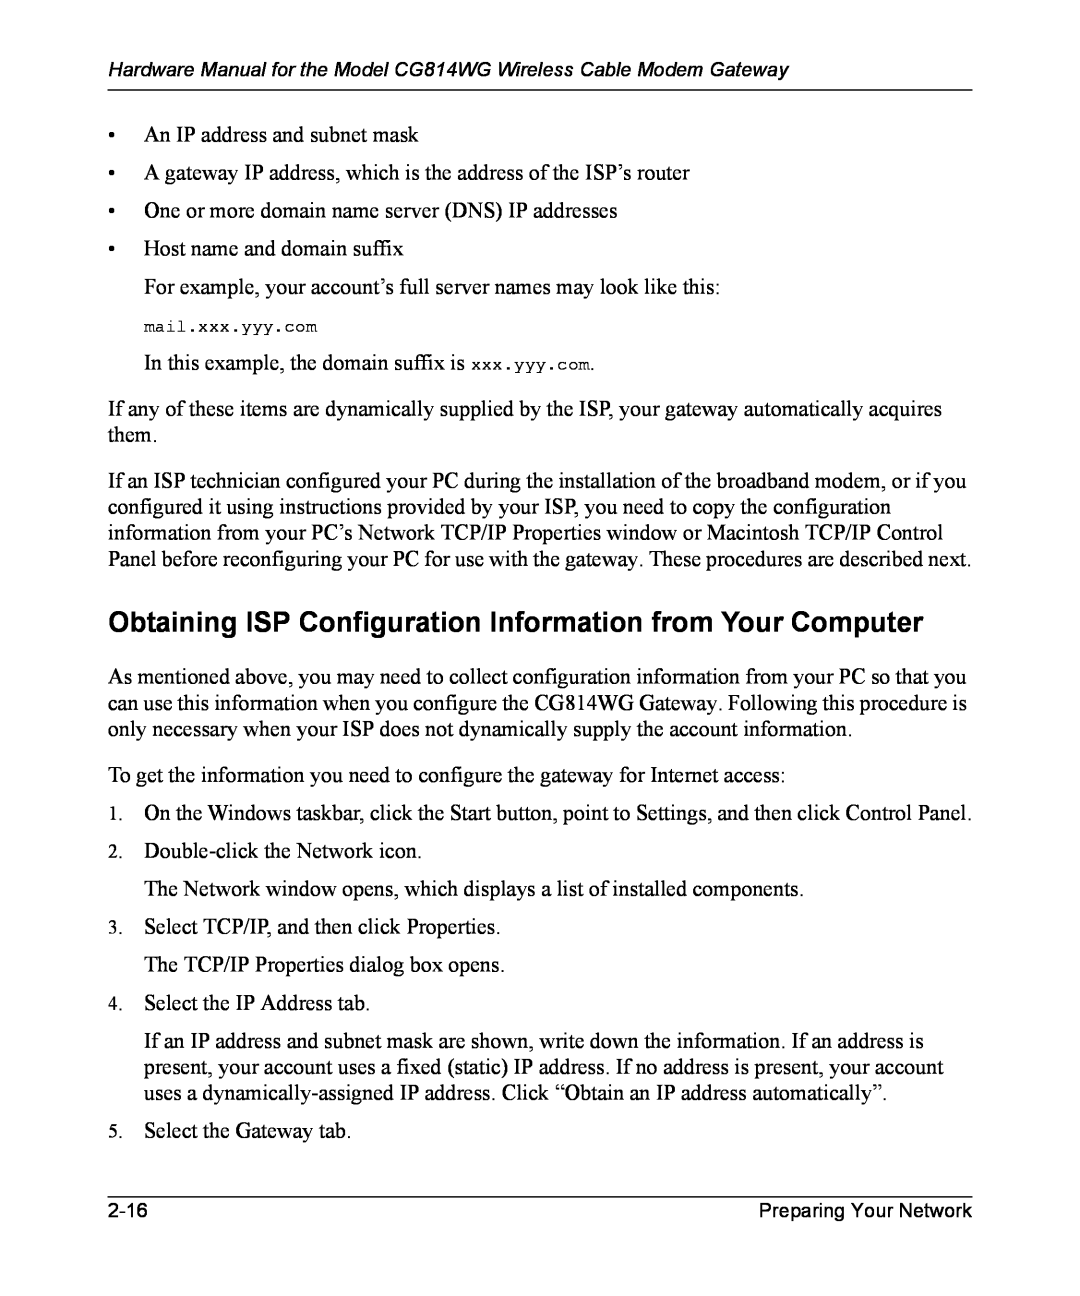 NETGEAR CG814WG manual Obtaining ISP Configuration Information from Your Computer, mail.xxx.yyy.com 